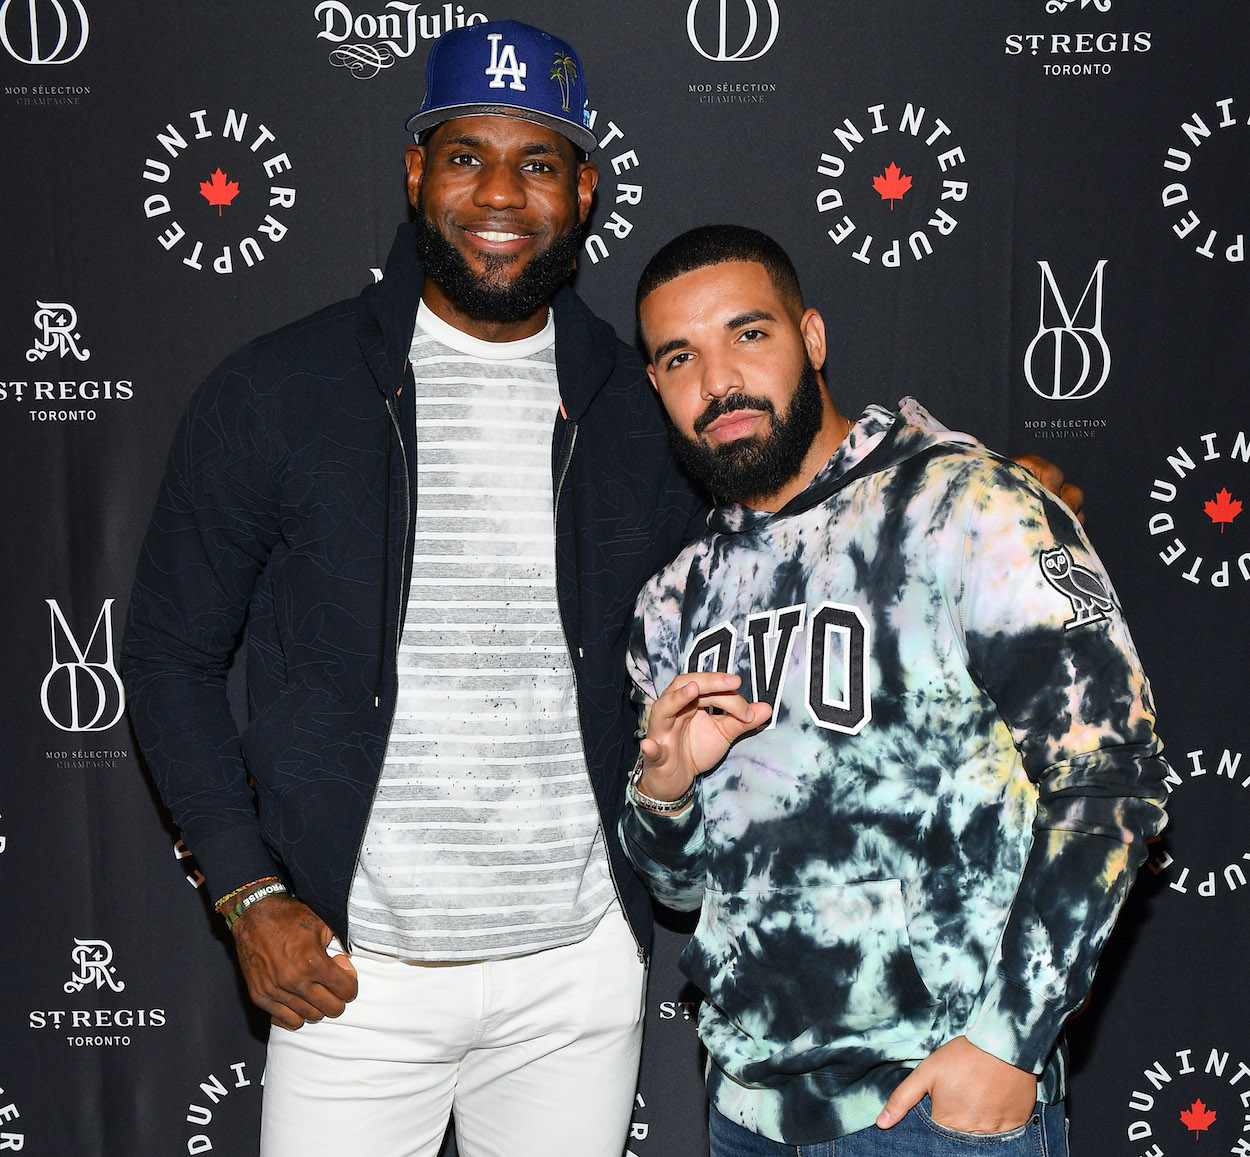 LeBron James is teaming up with Drake to enter an industry projected to be worth $57 billion by 2027.